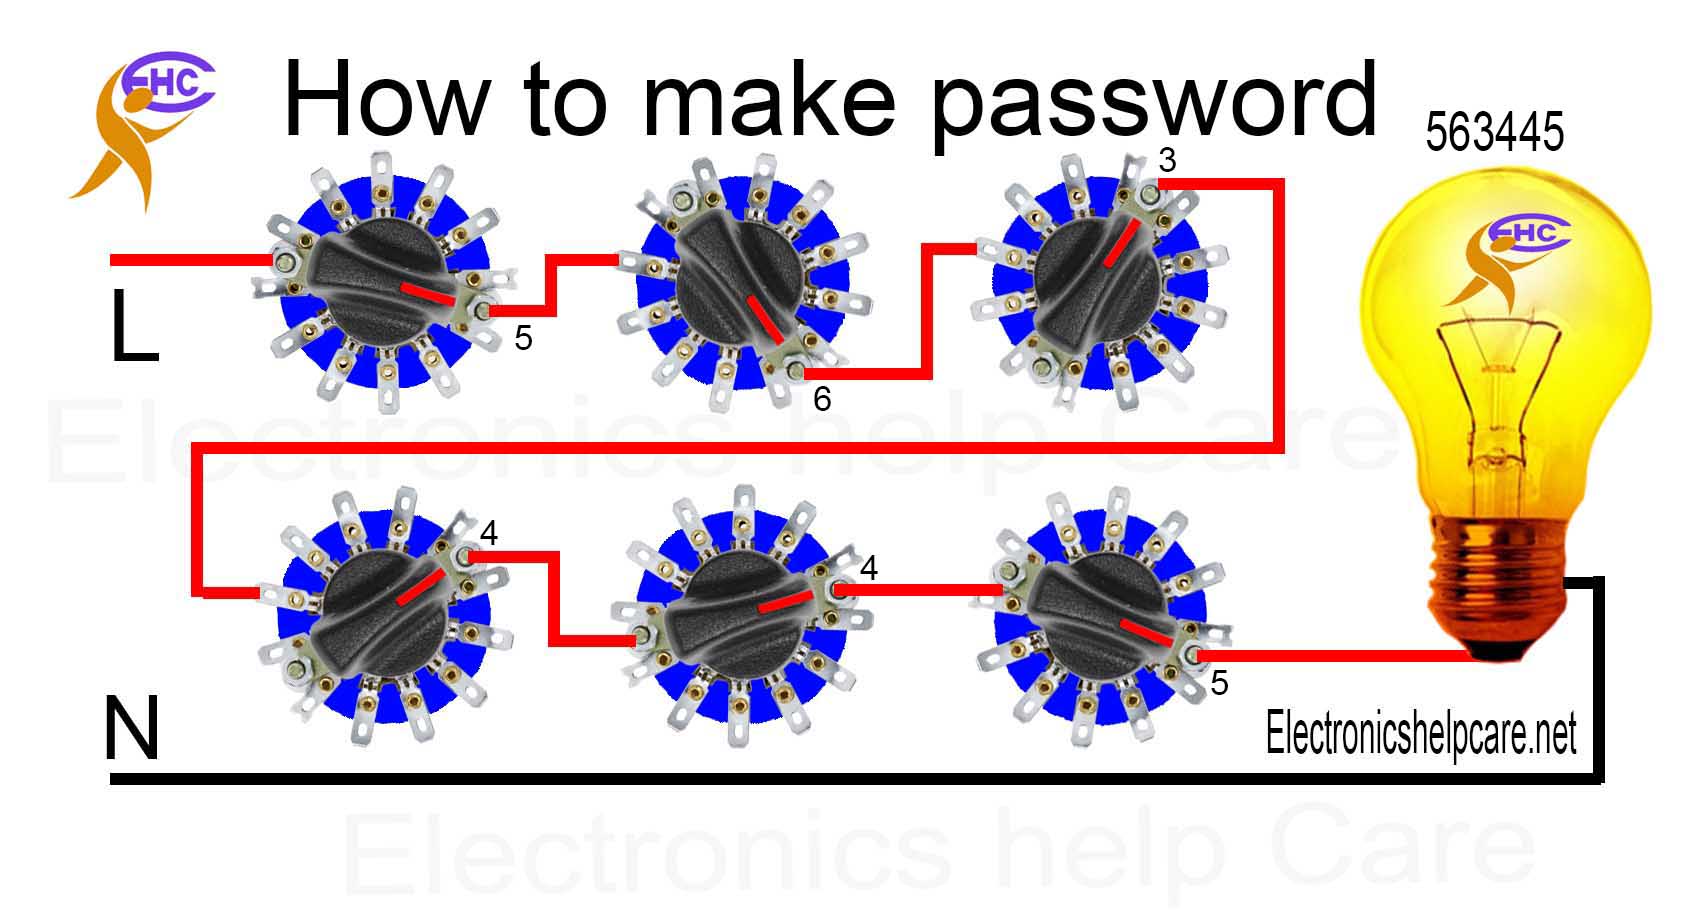 How to make password